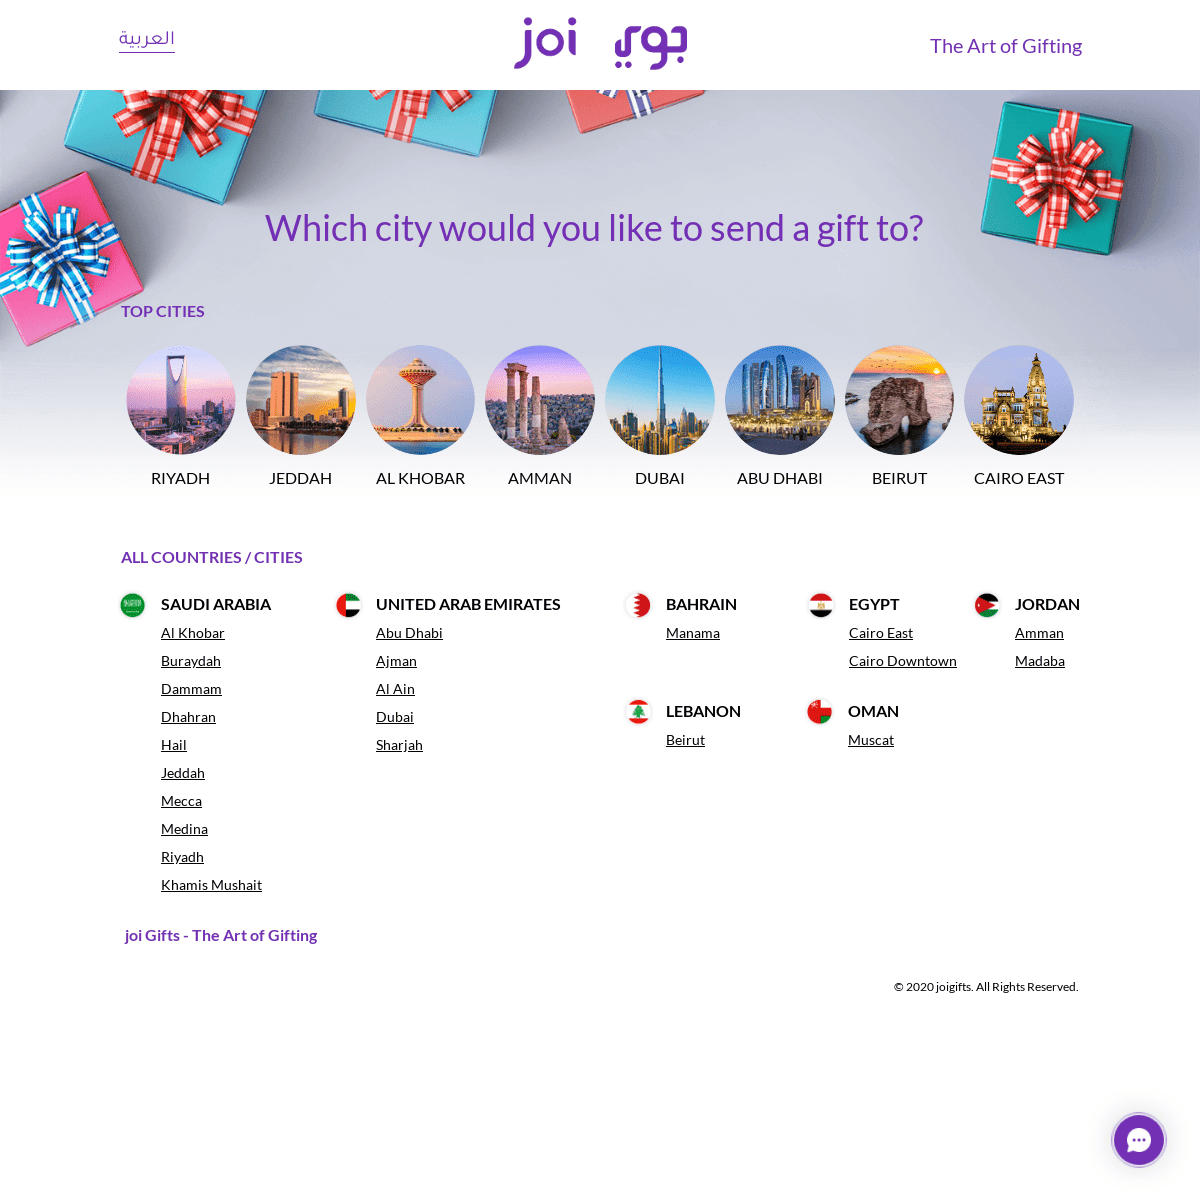 A complete backup of joigifts.com